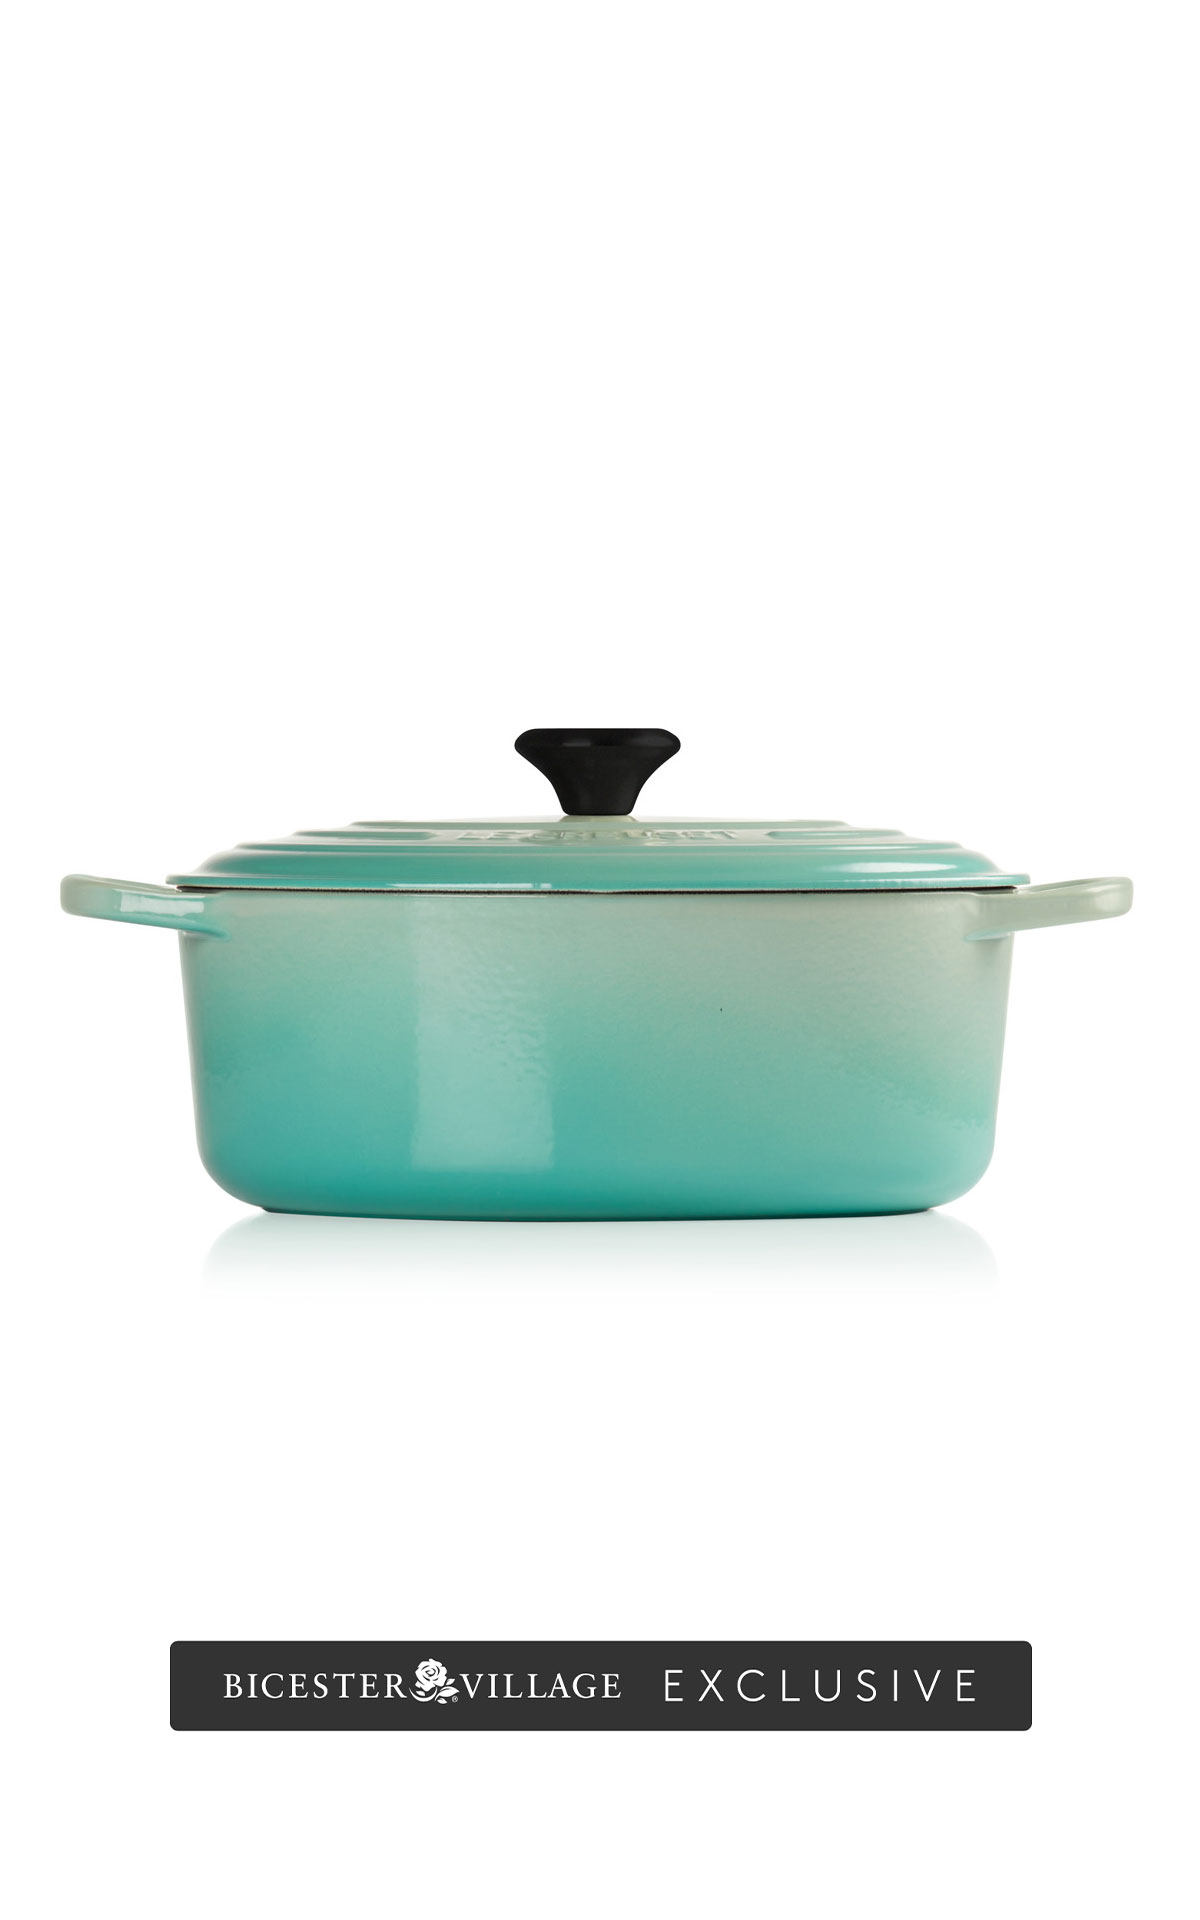 Le Creuset 31cm Cast iron oval casserole cool mint from Bicester Village